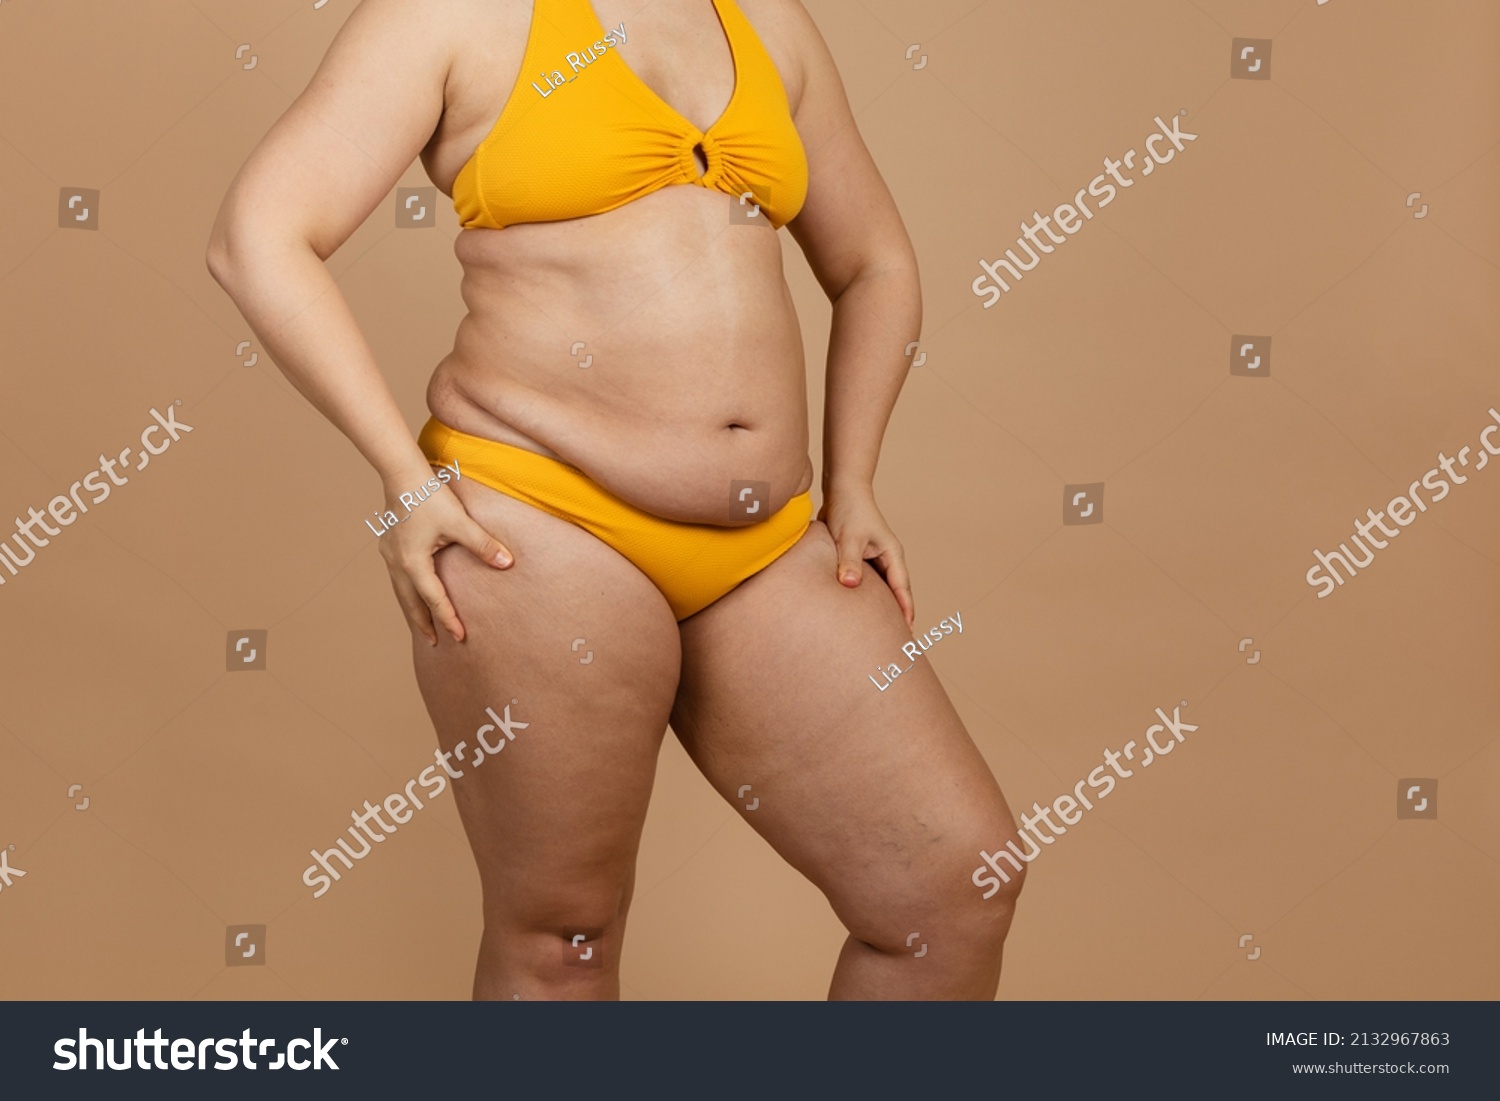 Cropped Image Overweight Fat Naked Woman Stock Photo Shutterstock